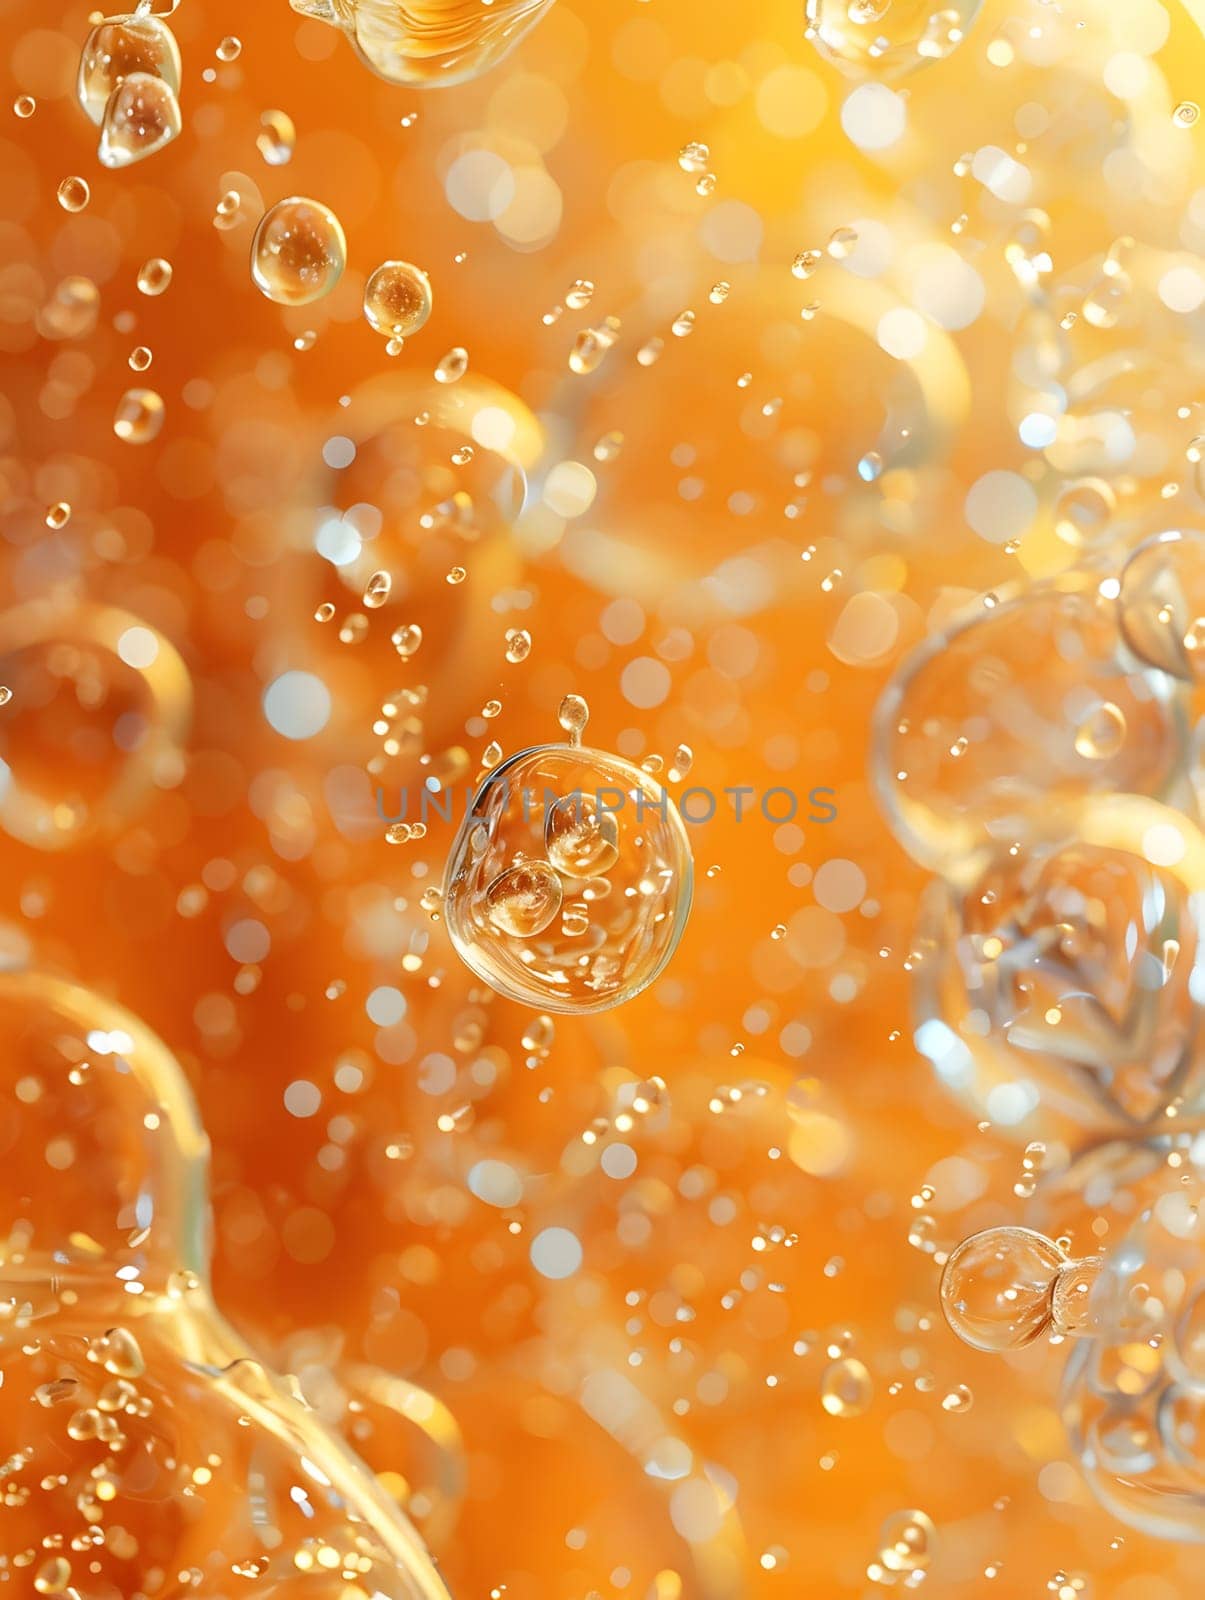 A closeup of bubbles in orange liquid, a key ingredient in this amber fluid commonly used in cuisine. Try incorporating it into your peach dish recipe for a burst of flavor